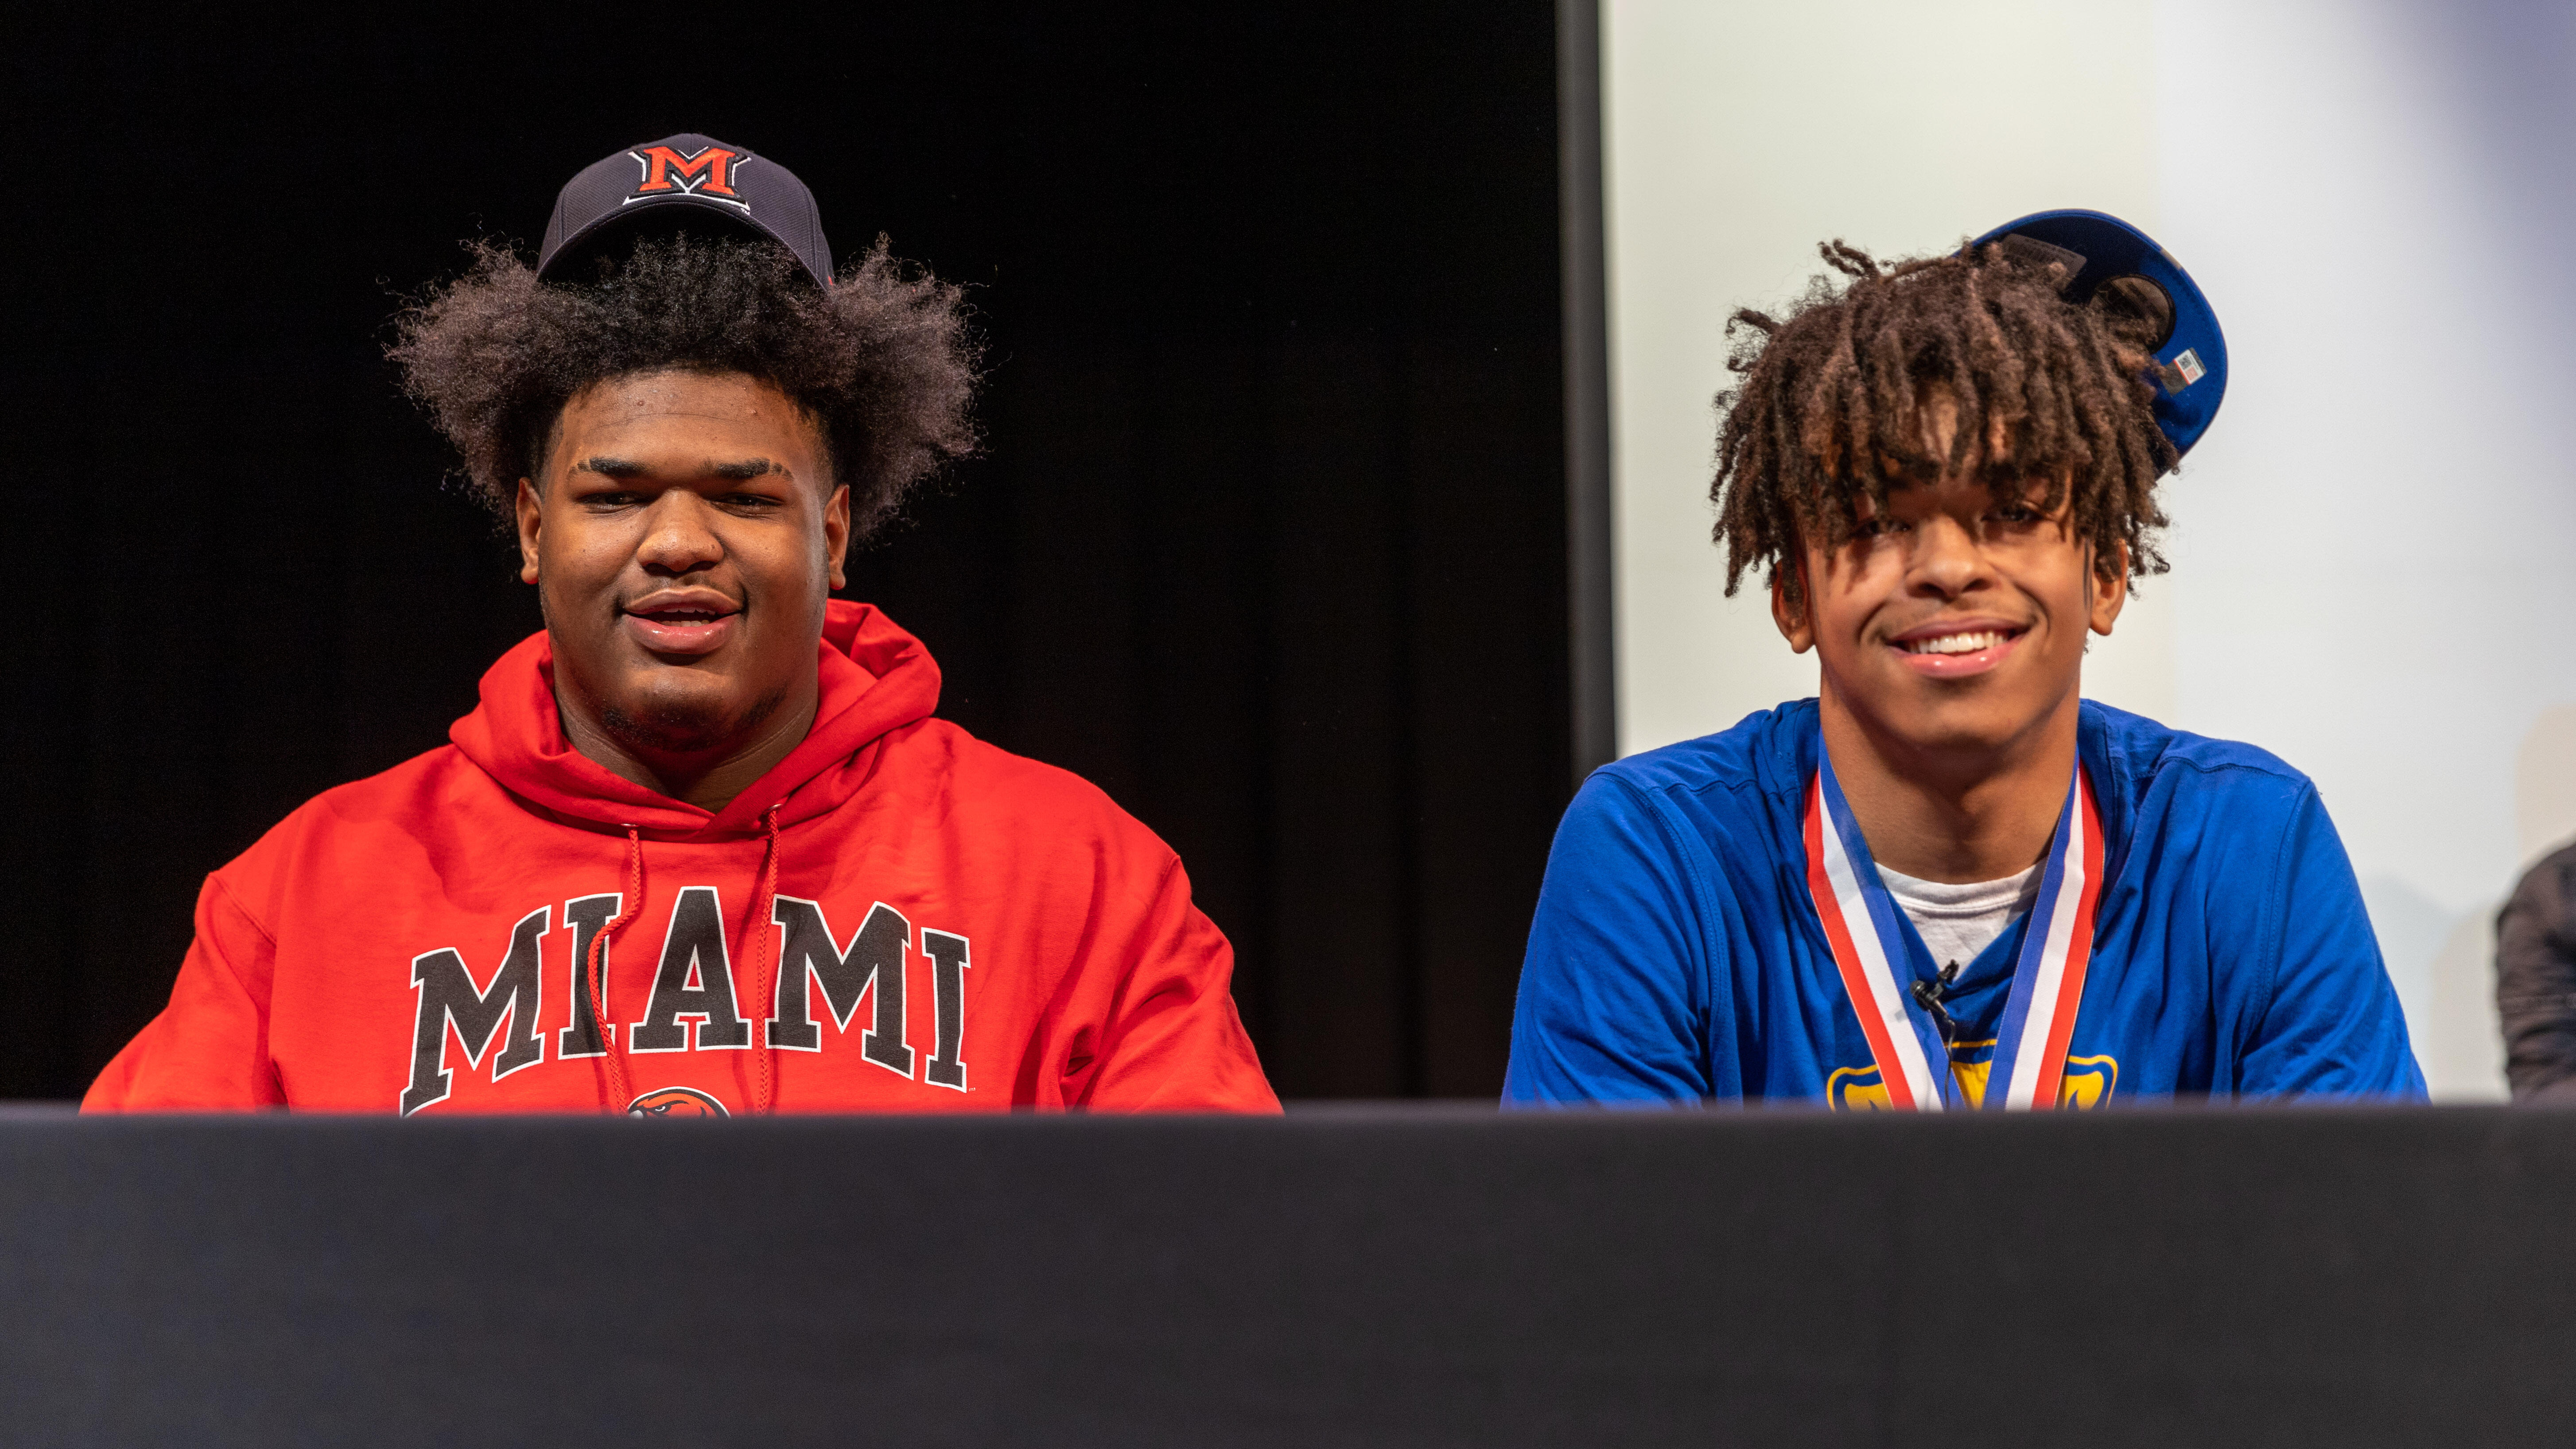 Cruce Brookins, Greg Smith sign National Letters of Intent to play Division I football